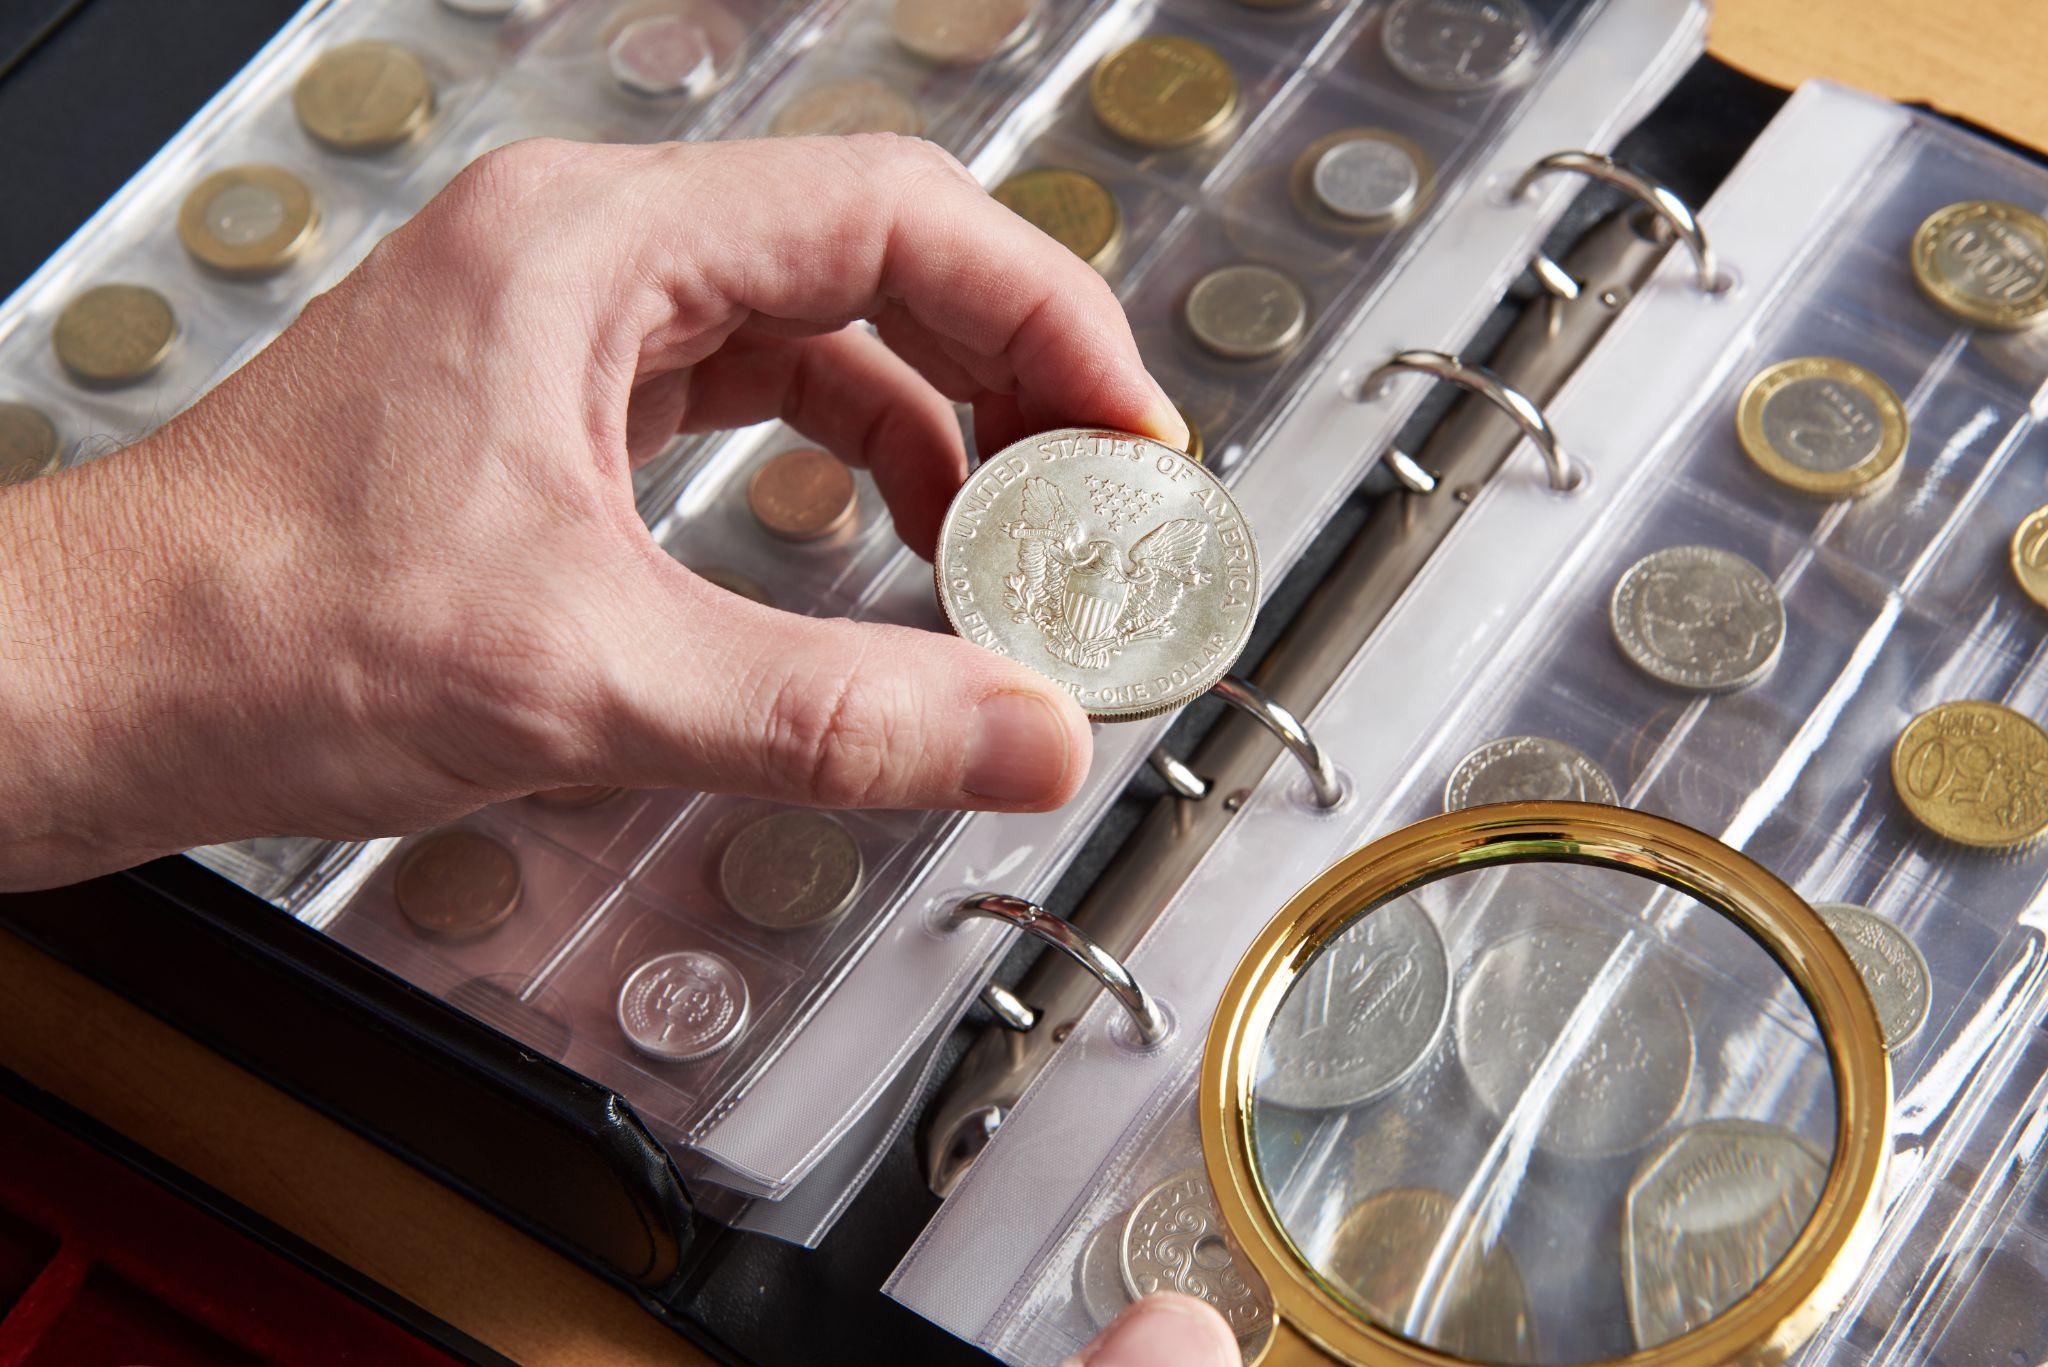 Man holding silver coin with left hand and binder with rare coins organized inside on table.